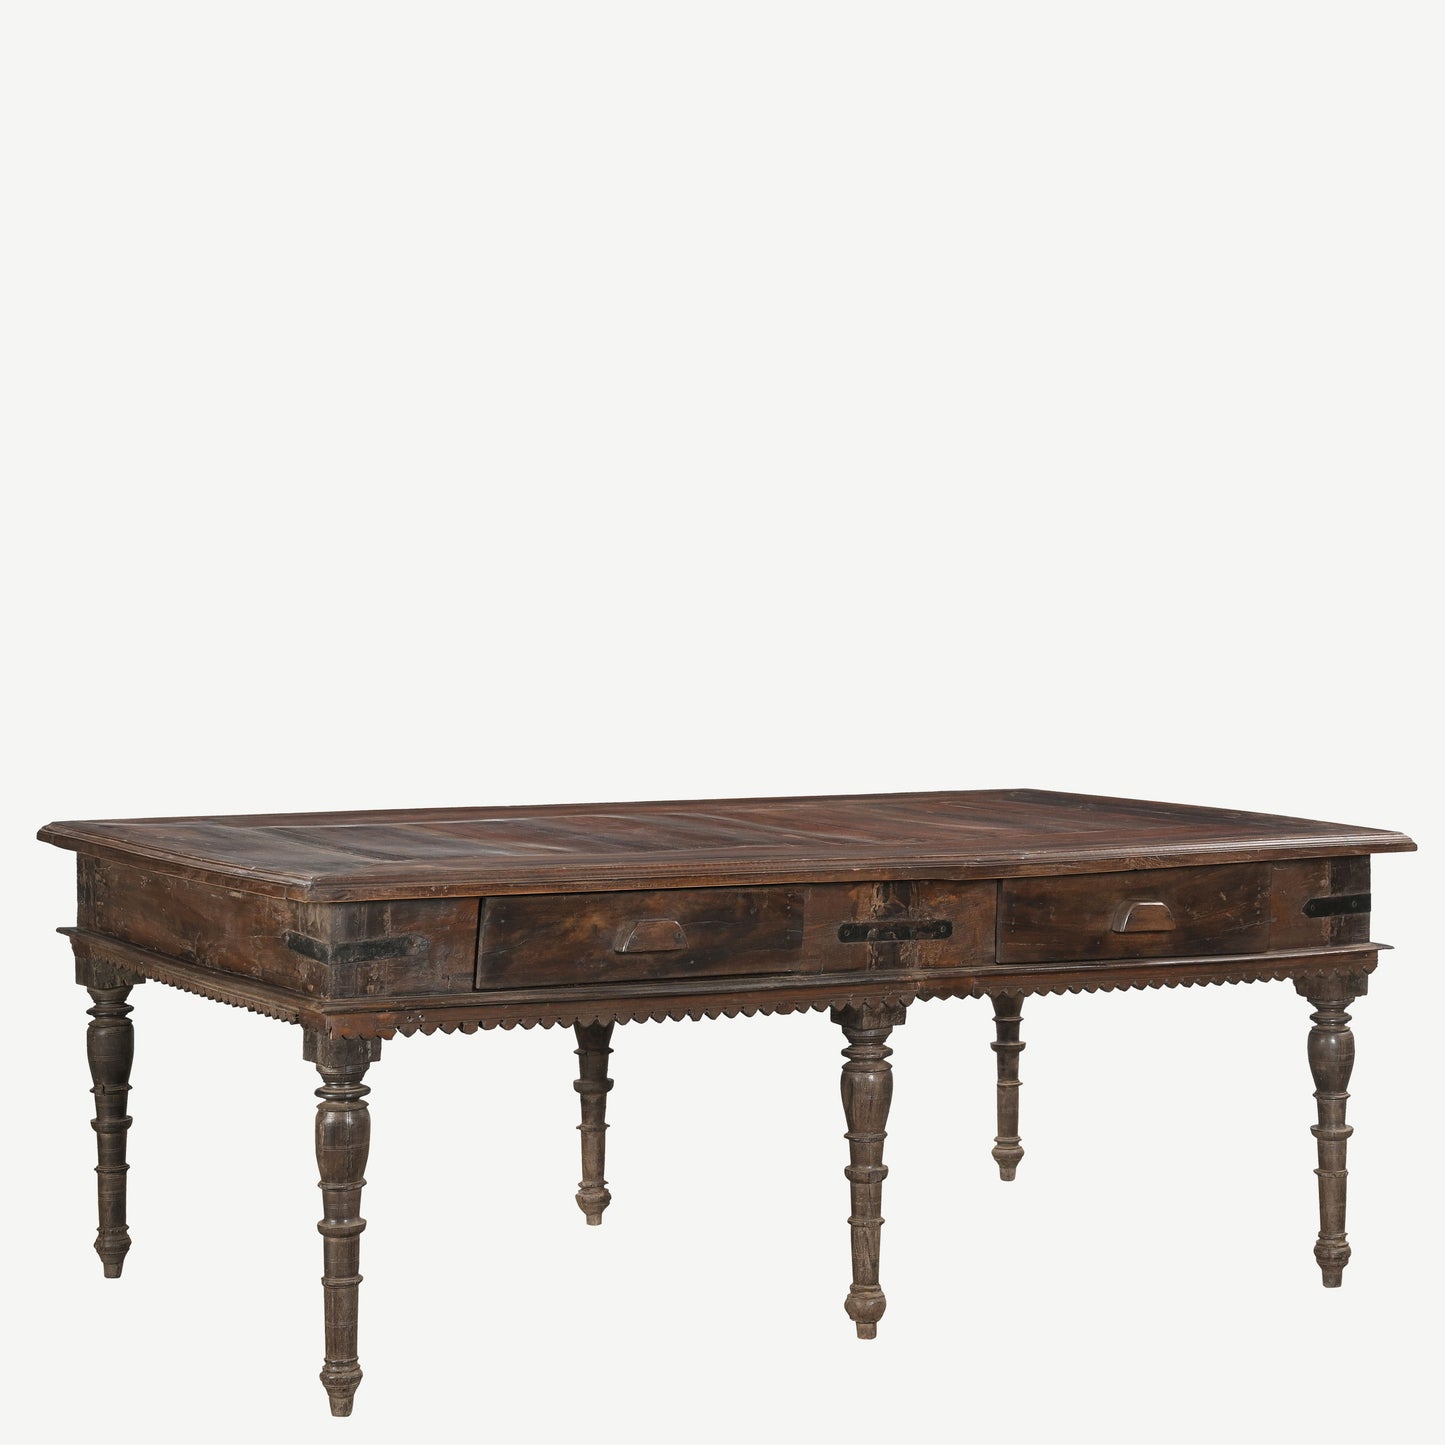 The Asha Antique Dining Table